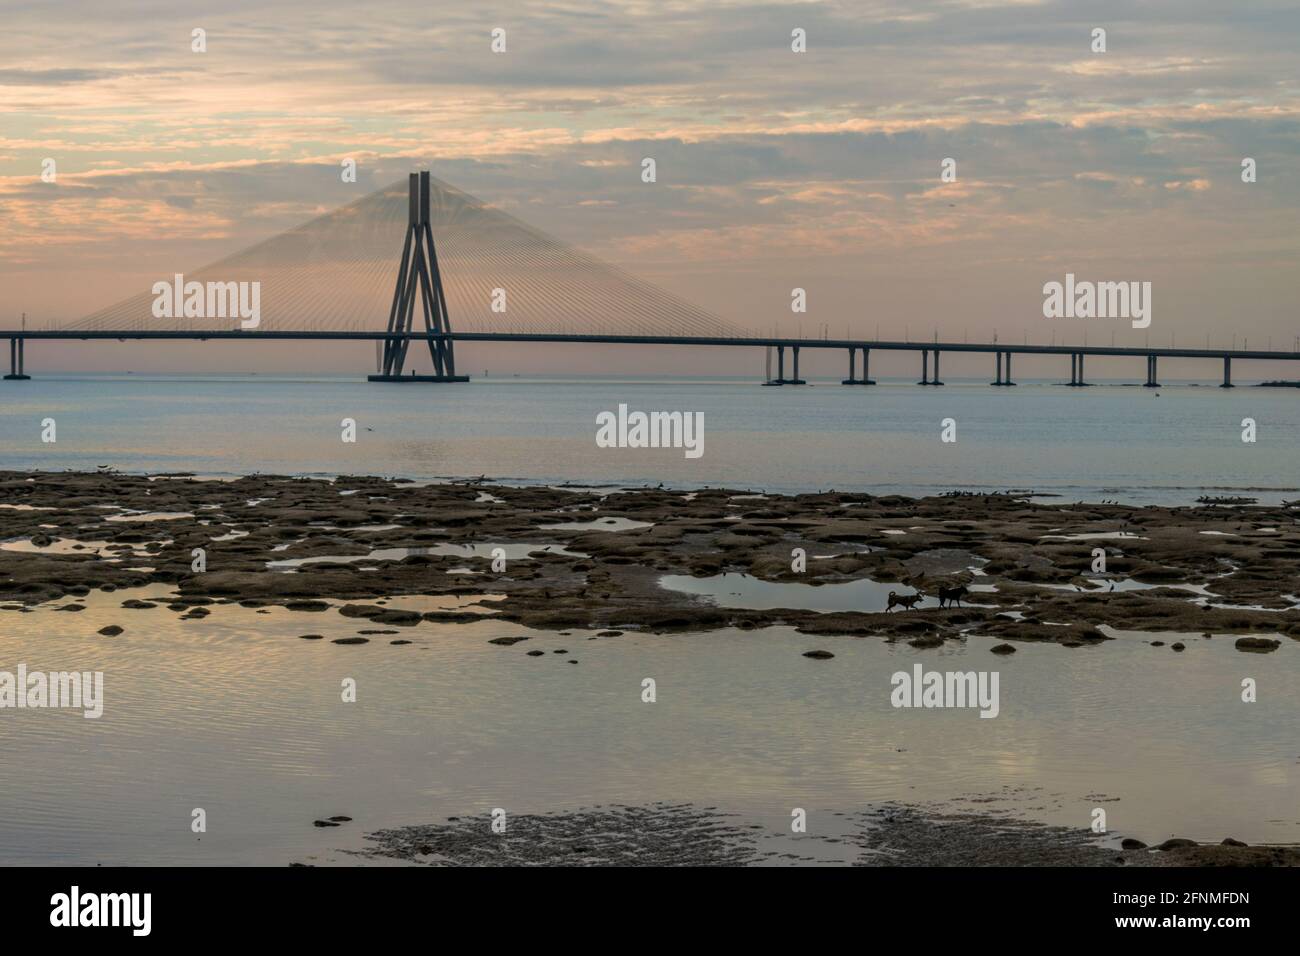 The Bandra–Worli Sea Link, also called Rajiv Gandhi Sea Link, clicked on a bright cloudy day just before sunset Stock Photo